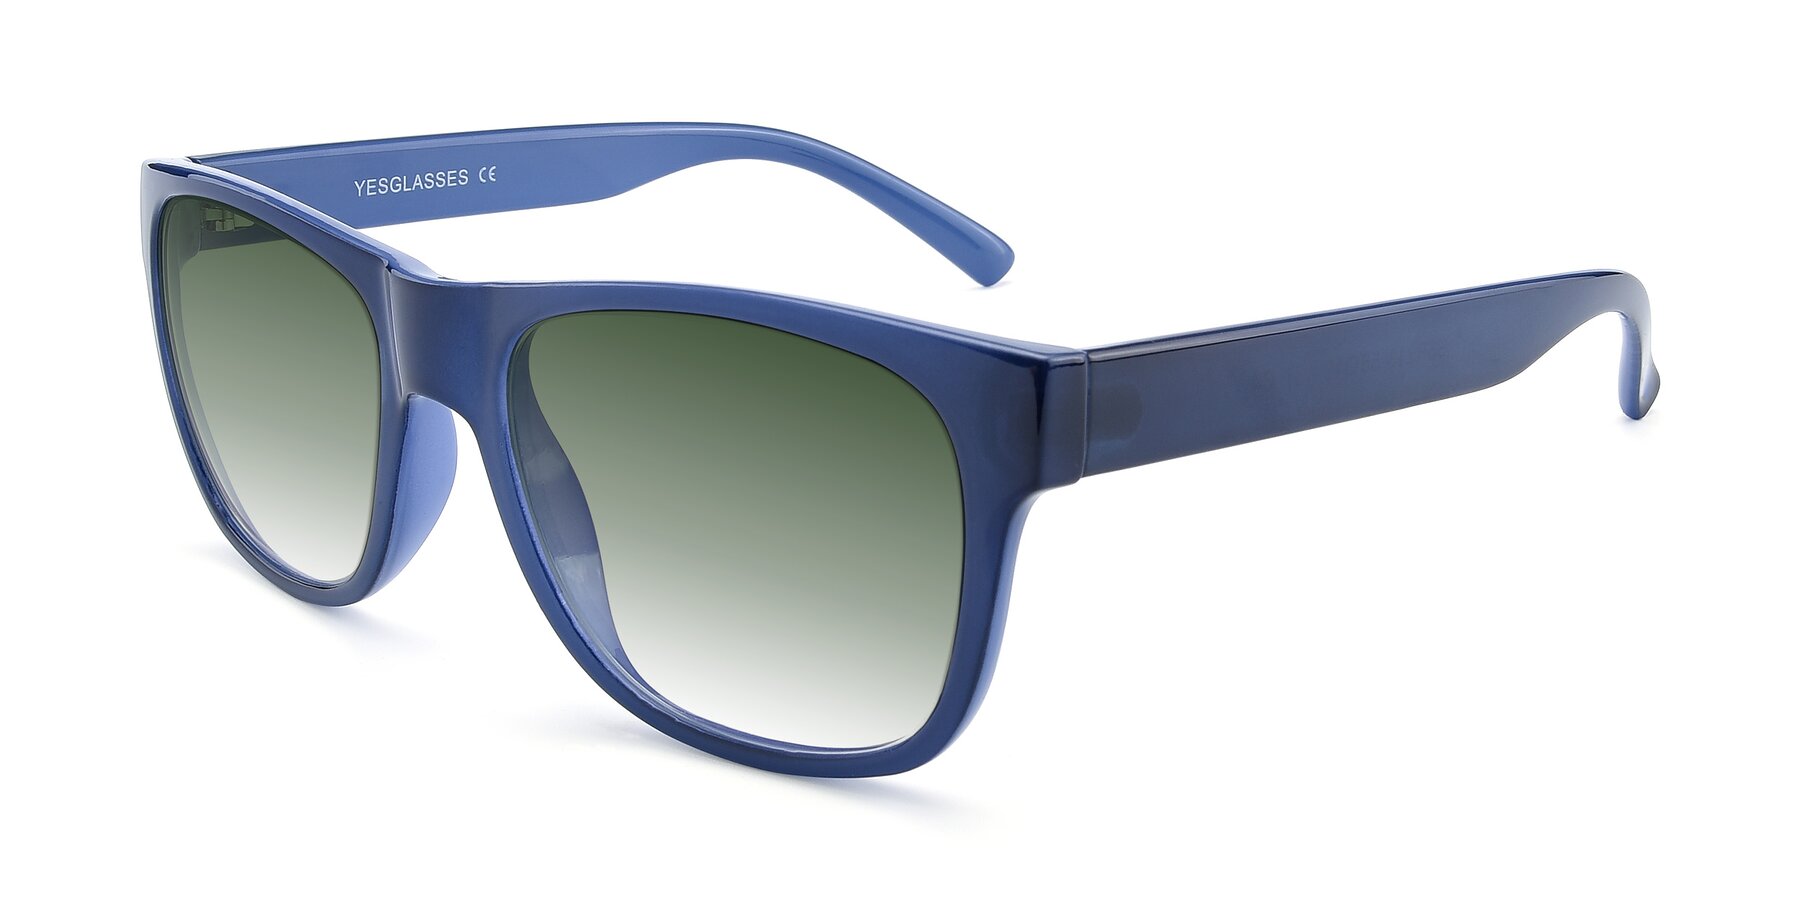 Angle of SSR213 in Blue with Green Gradient Lenses